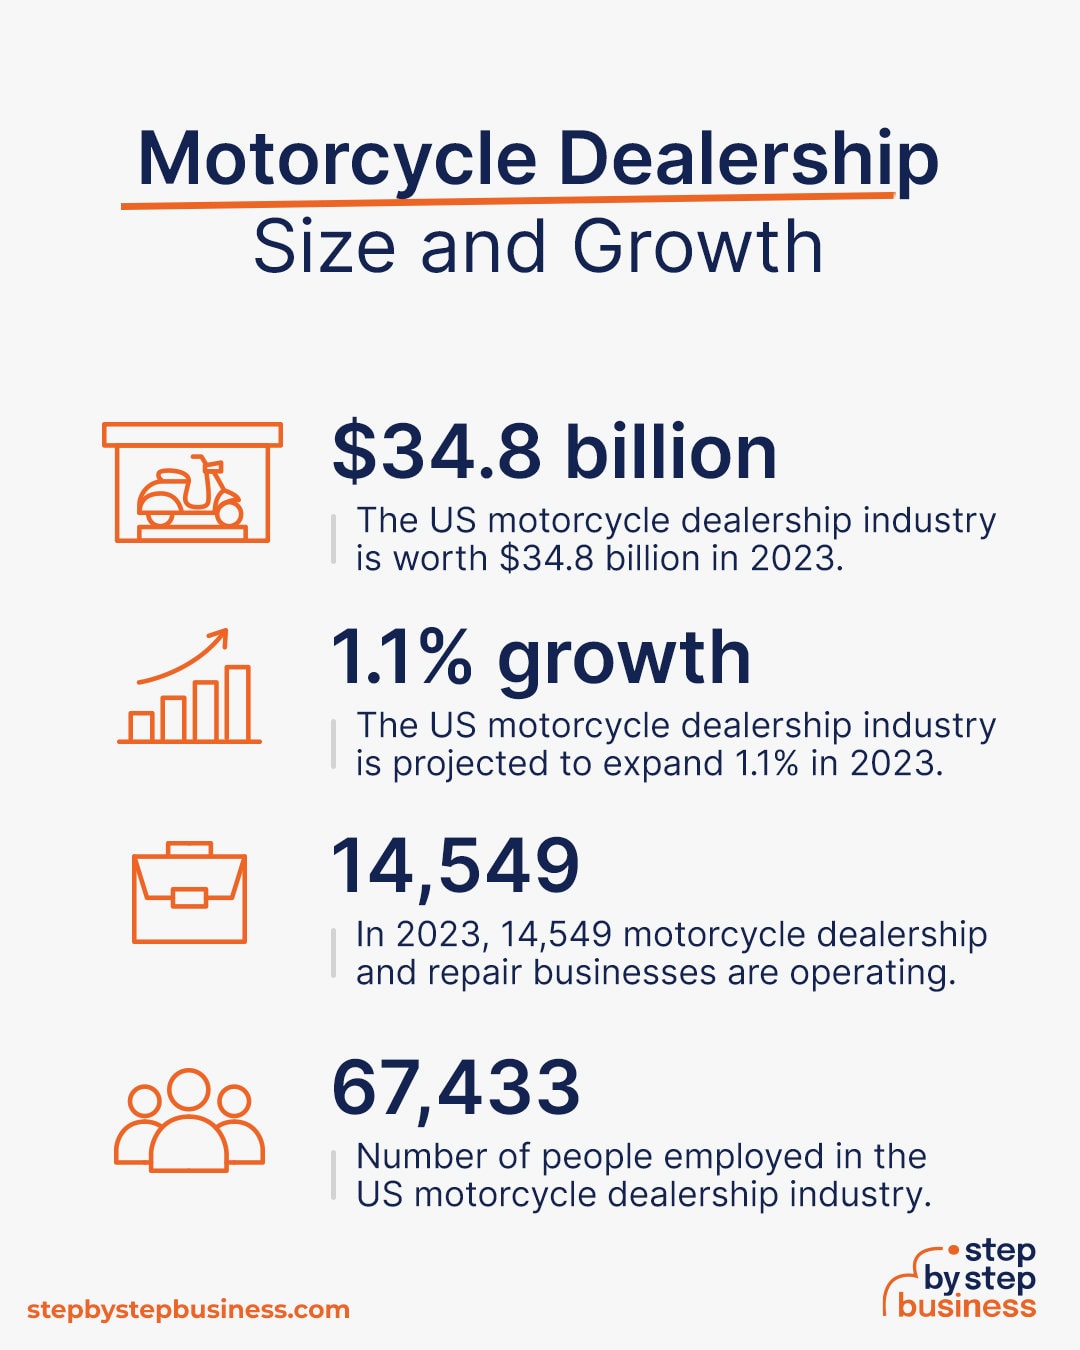 Motorcycle Dealership industry size and growth